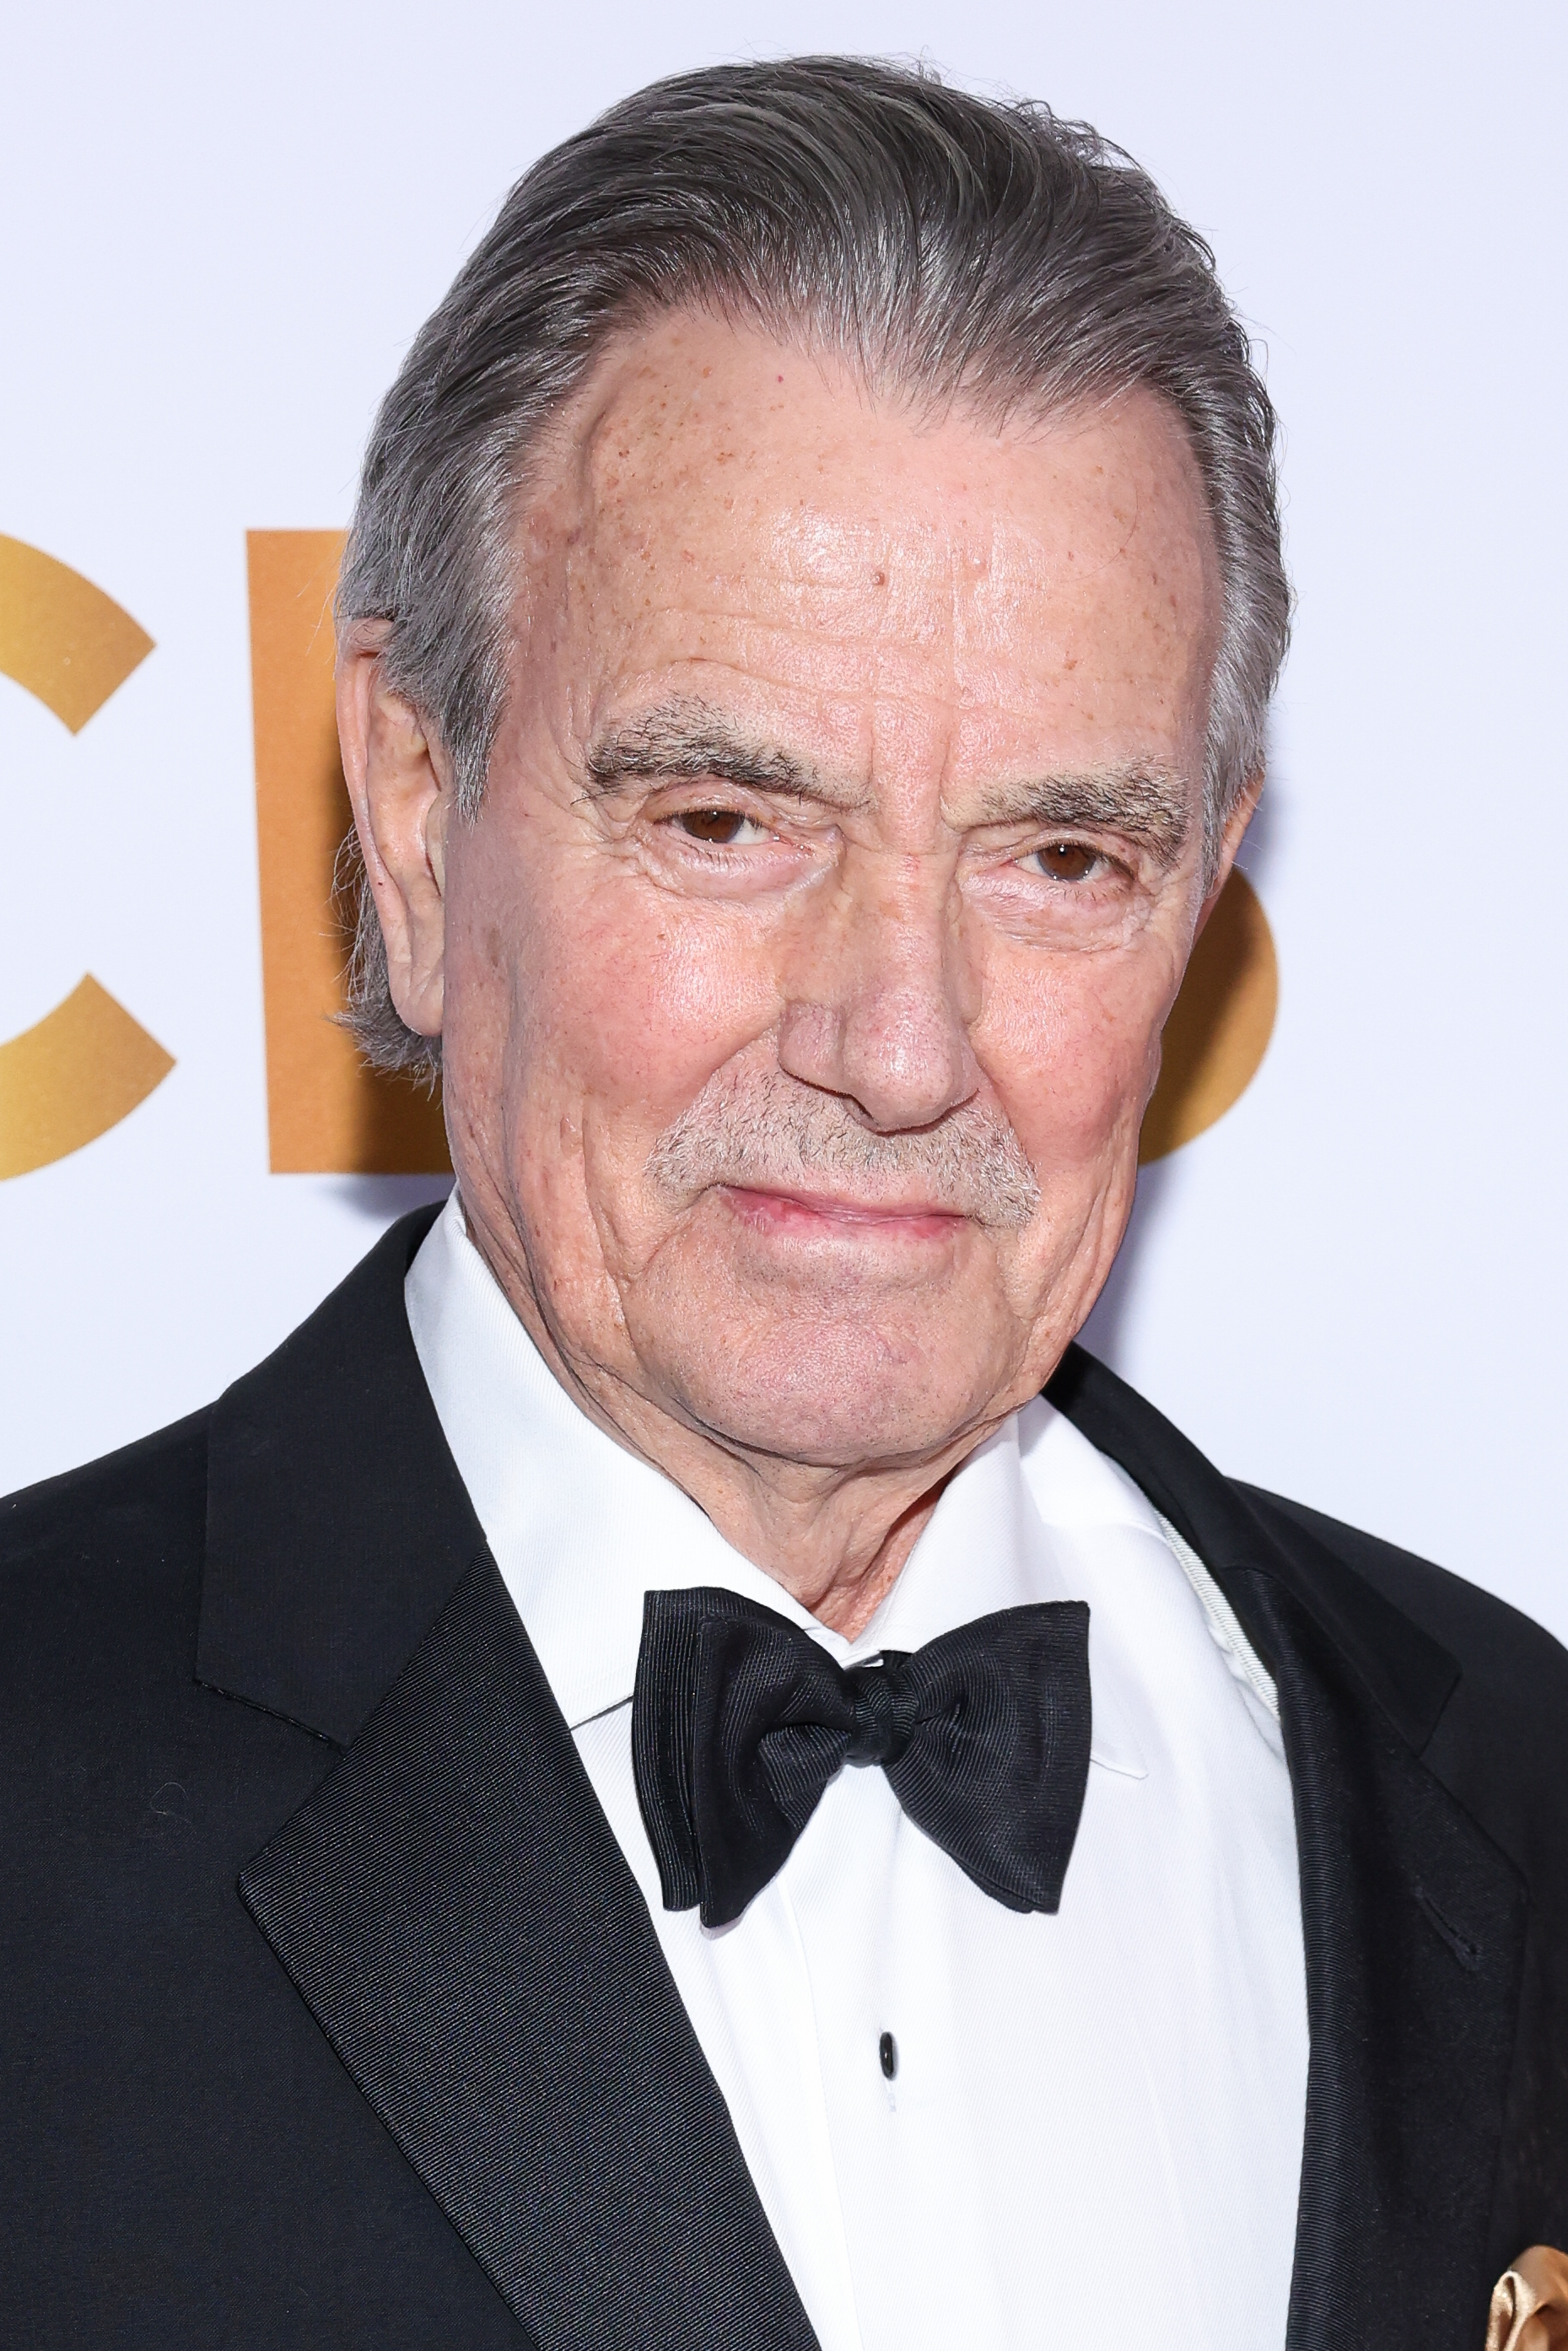 Eric Braeden attends Red carpet event for the 50th Anniversary of Daytime’s #1 Drama "The Young and The Restless" at Vibiana on March 17, 2023, in Los Angeles, California. | Source: Getty Images